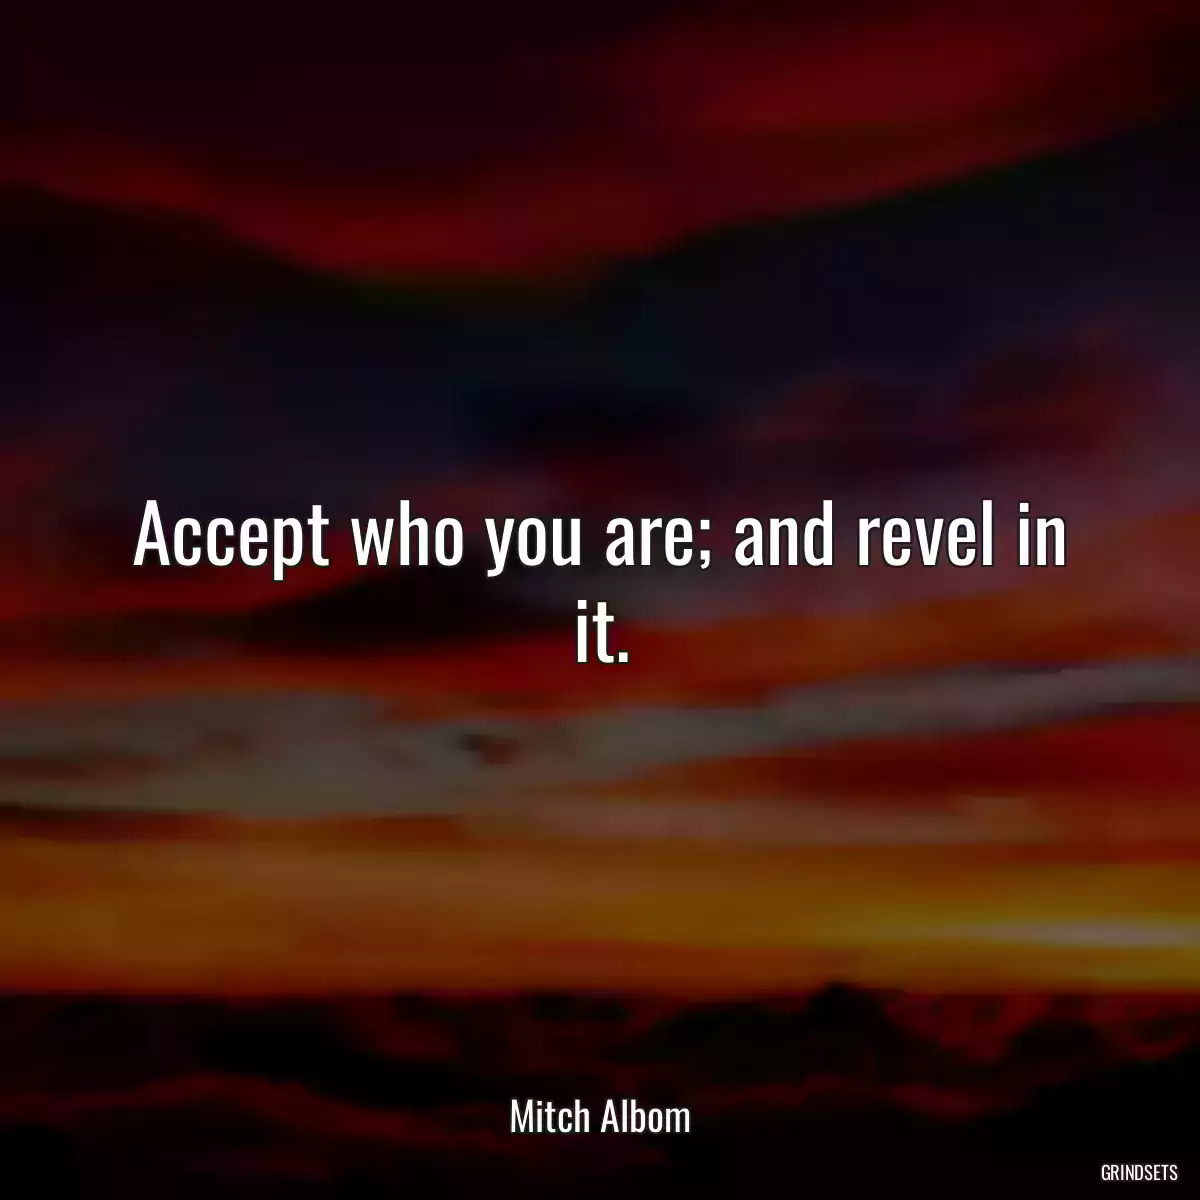 Accept who you are; and revel in it.